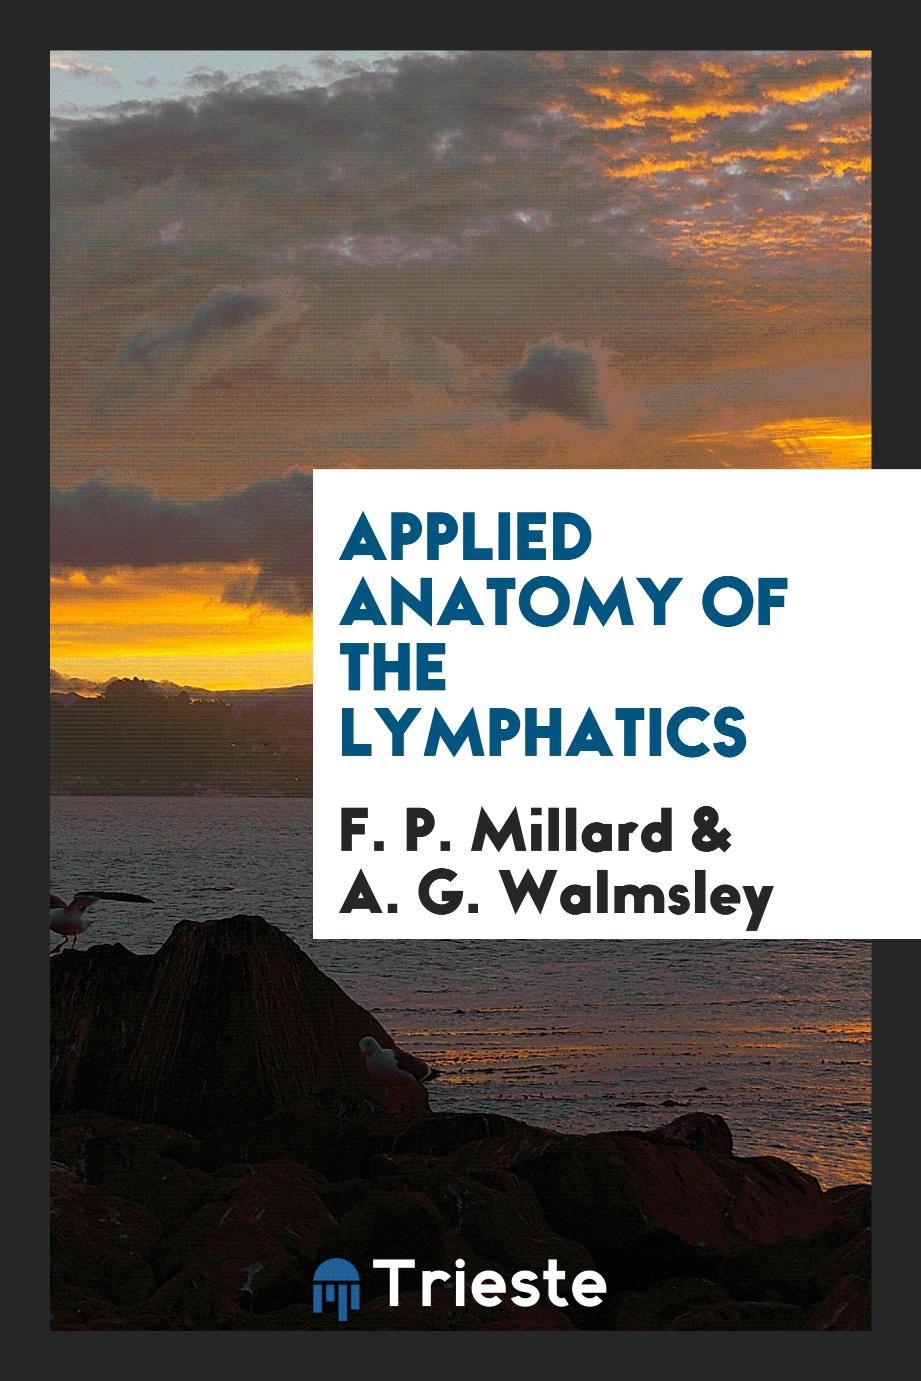 Applied anatomy of the lymphatics